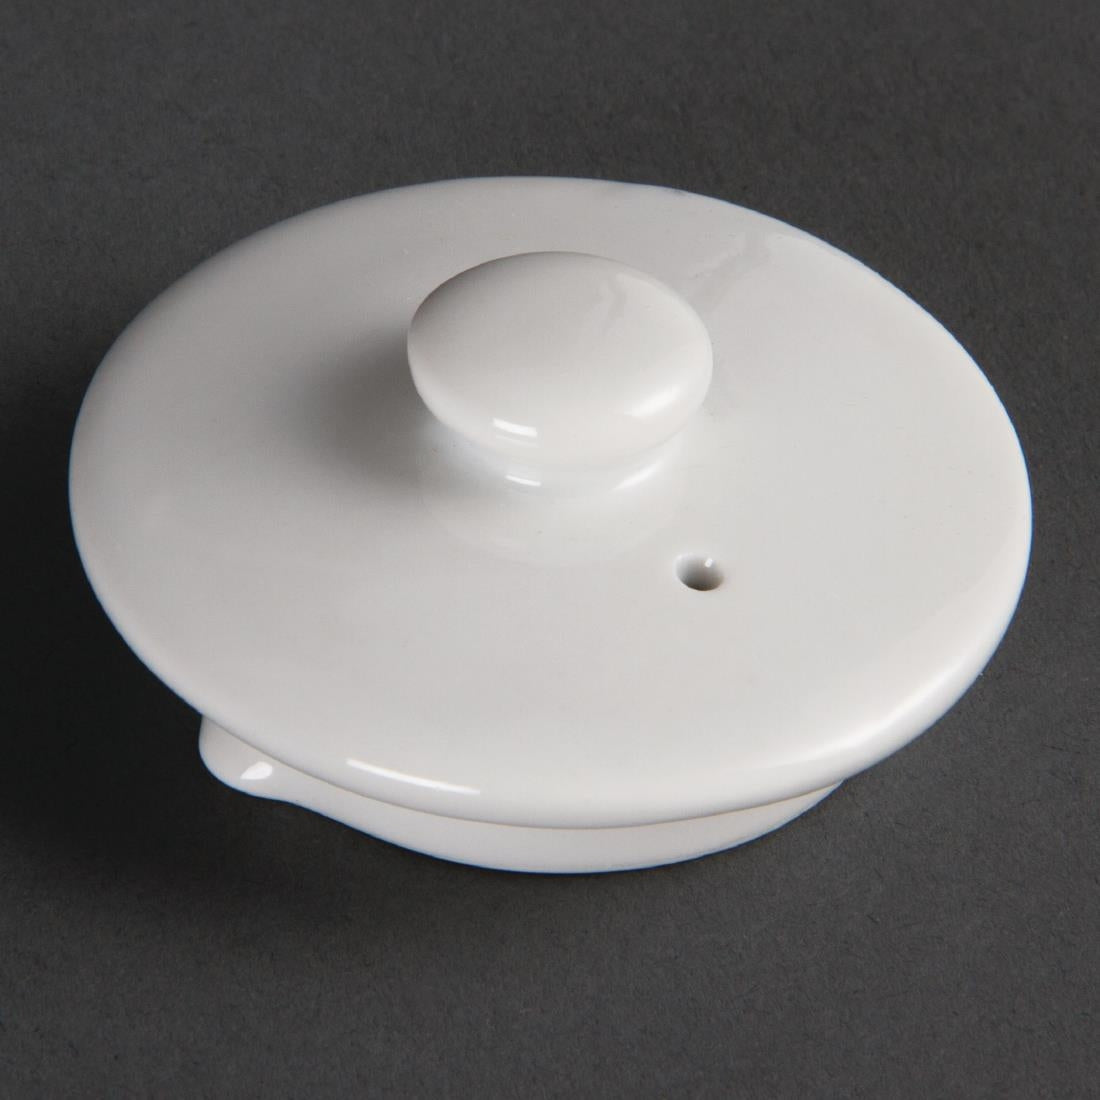 DP998 Lids For Olympia Whiteware 312ml Coffee or Teapots